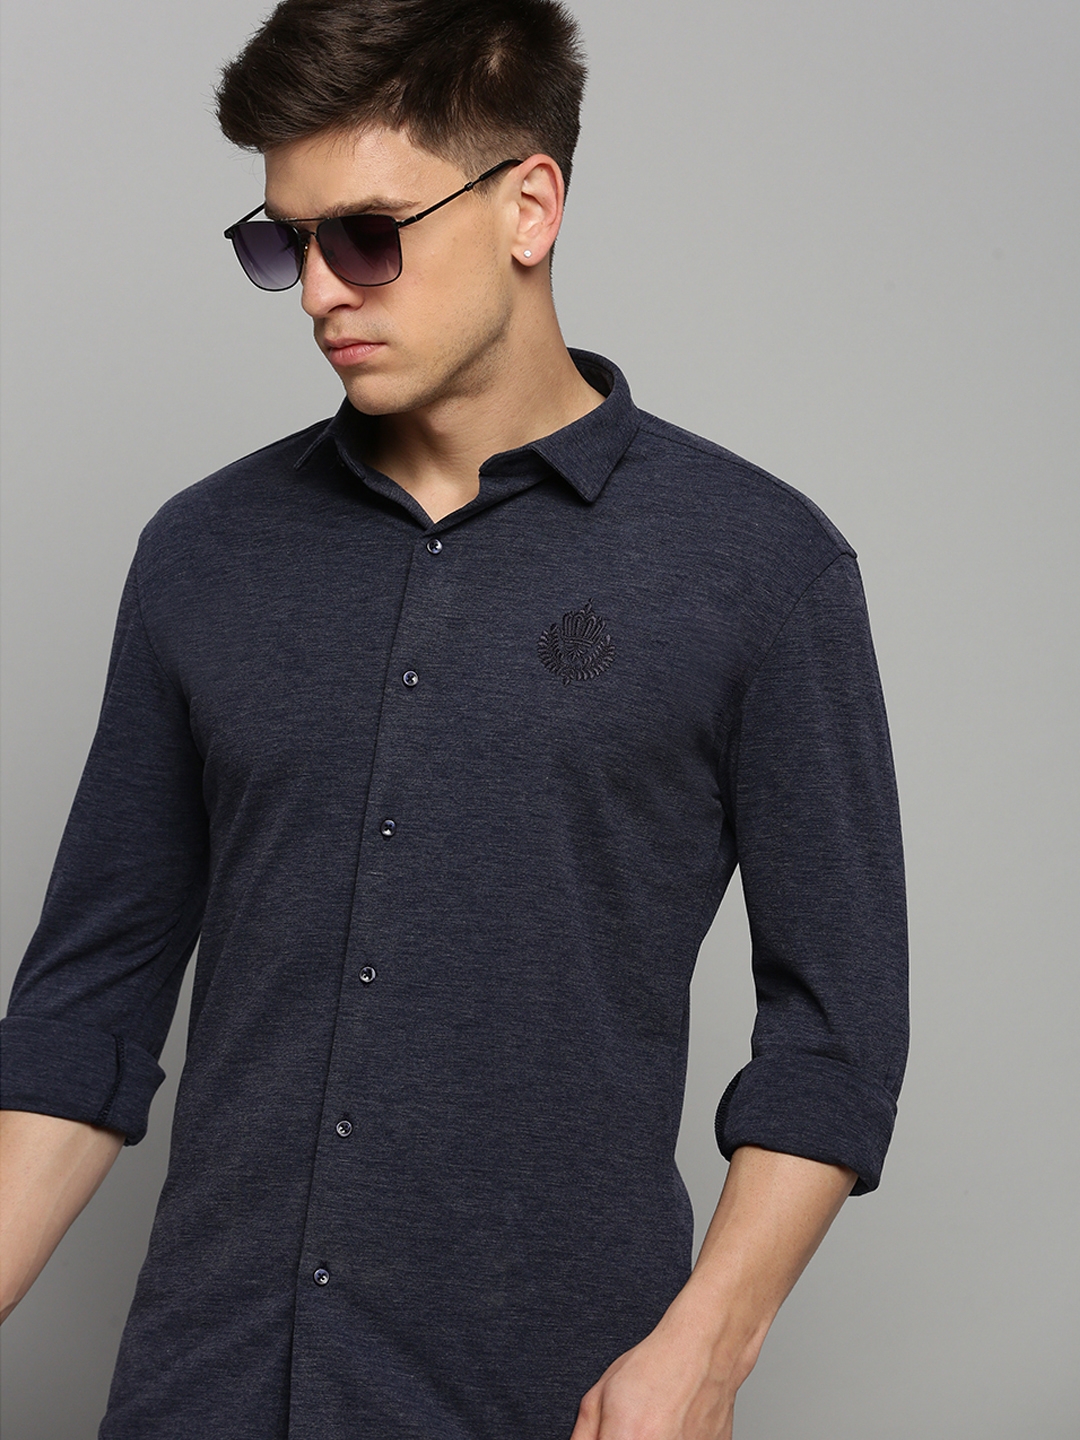 Showoff | SHOWOFF Men's Spread Collar Solid Navy Blue Classic Shirt 0